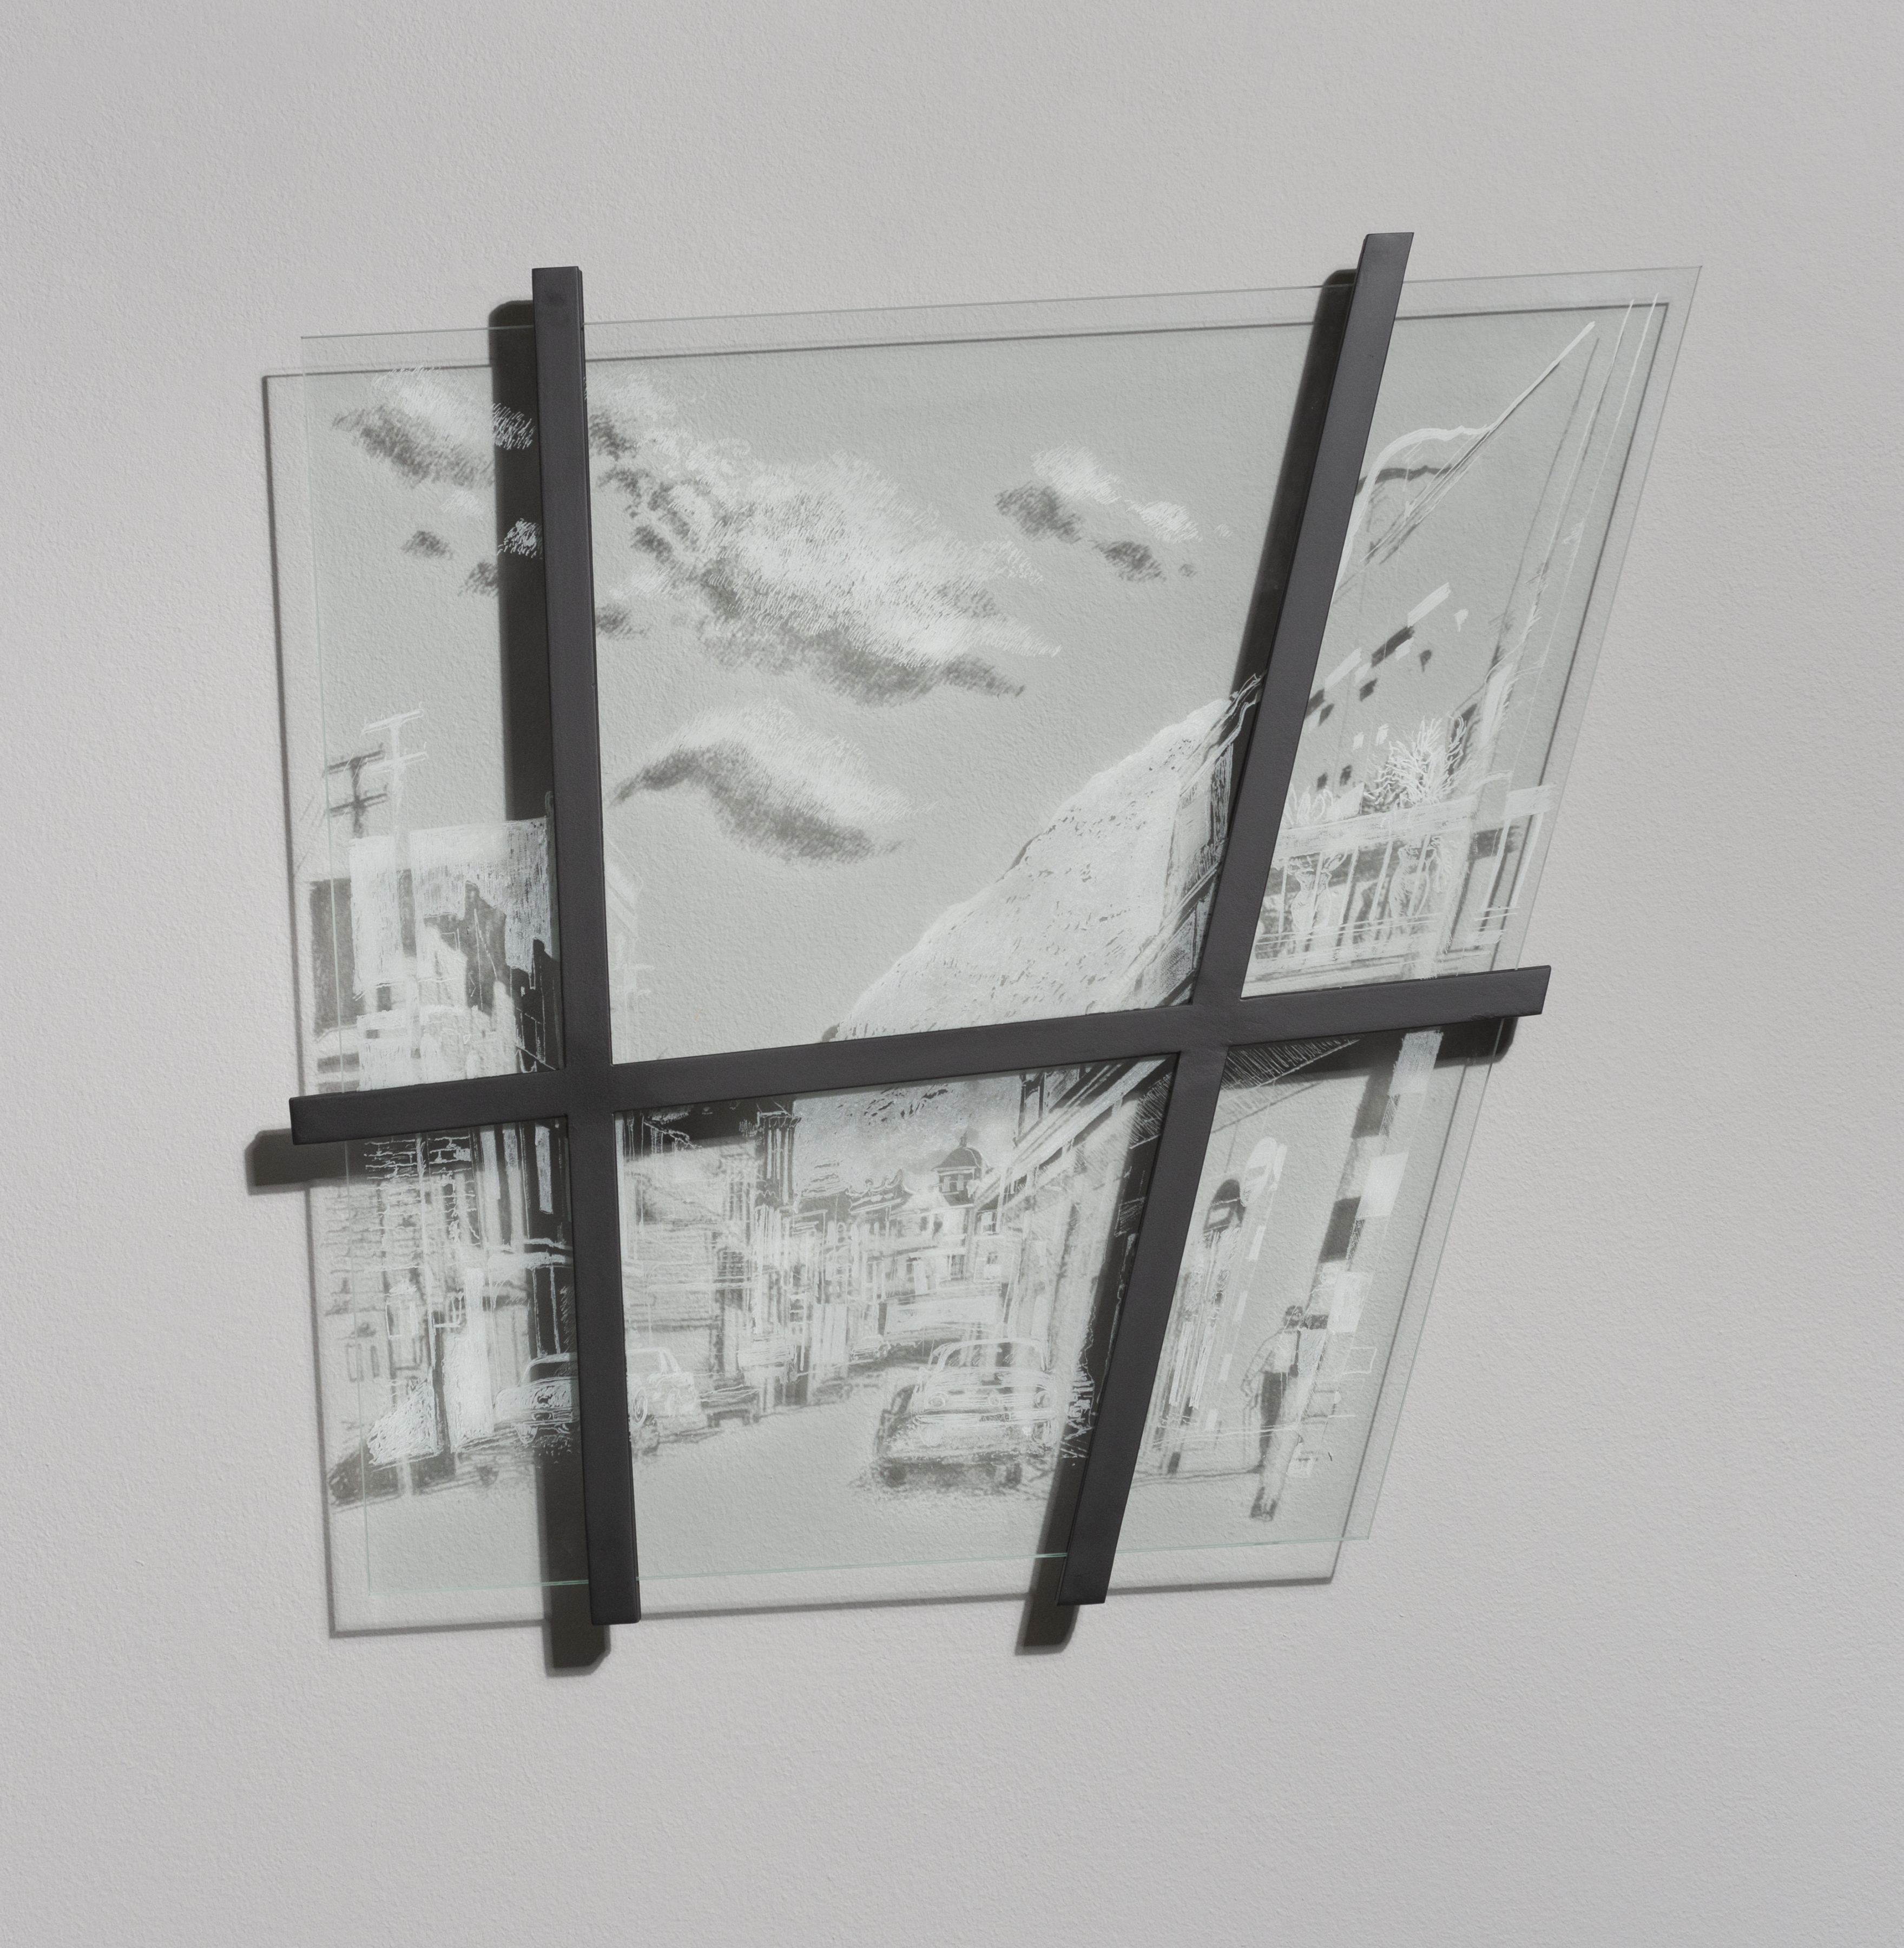 The Lost District: Hanover Street

2016

Hand engraved glass and steel frames

Work: 78 x 66 cm

Sales enquiries

&amp;nbsp;

&amp;nbsp;